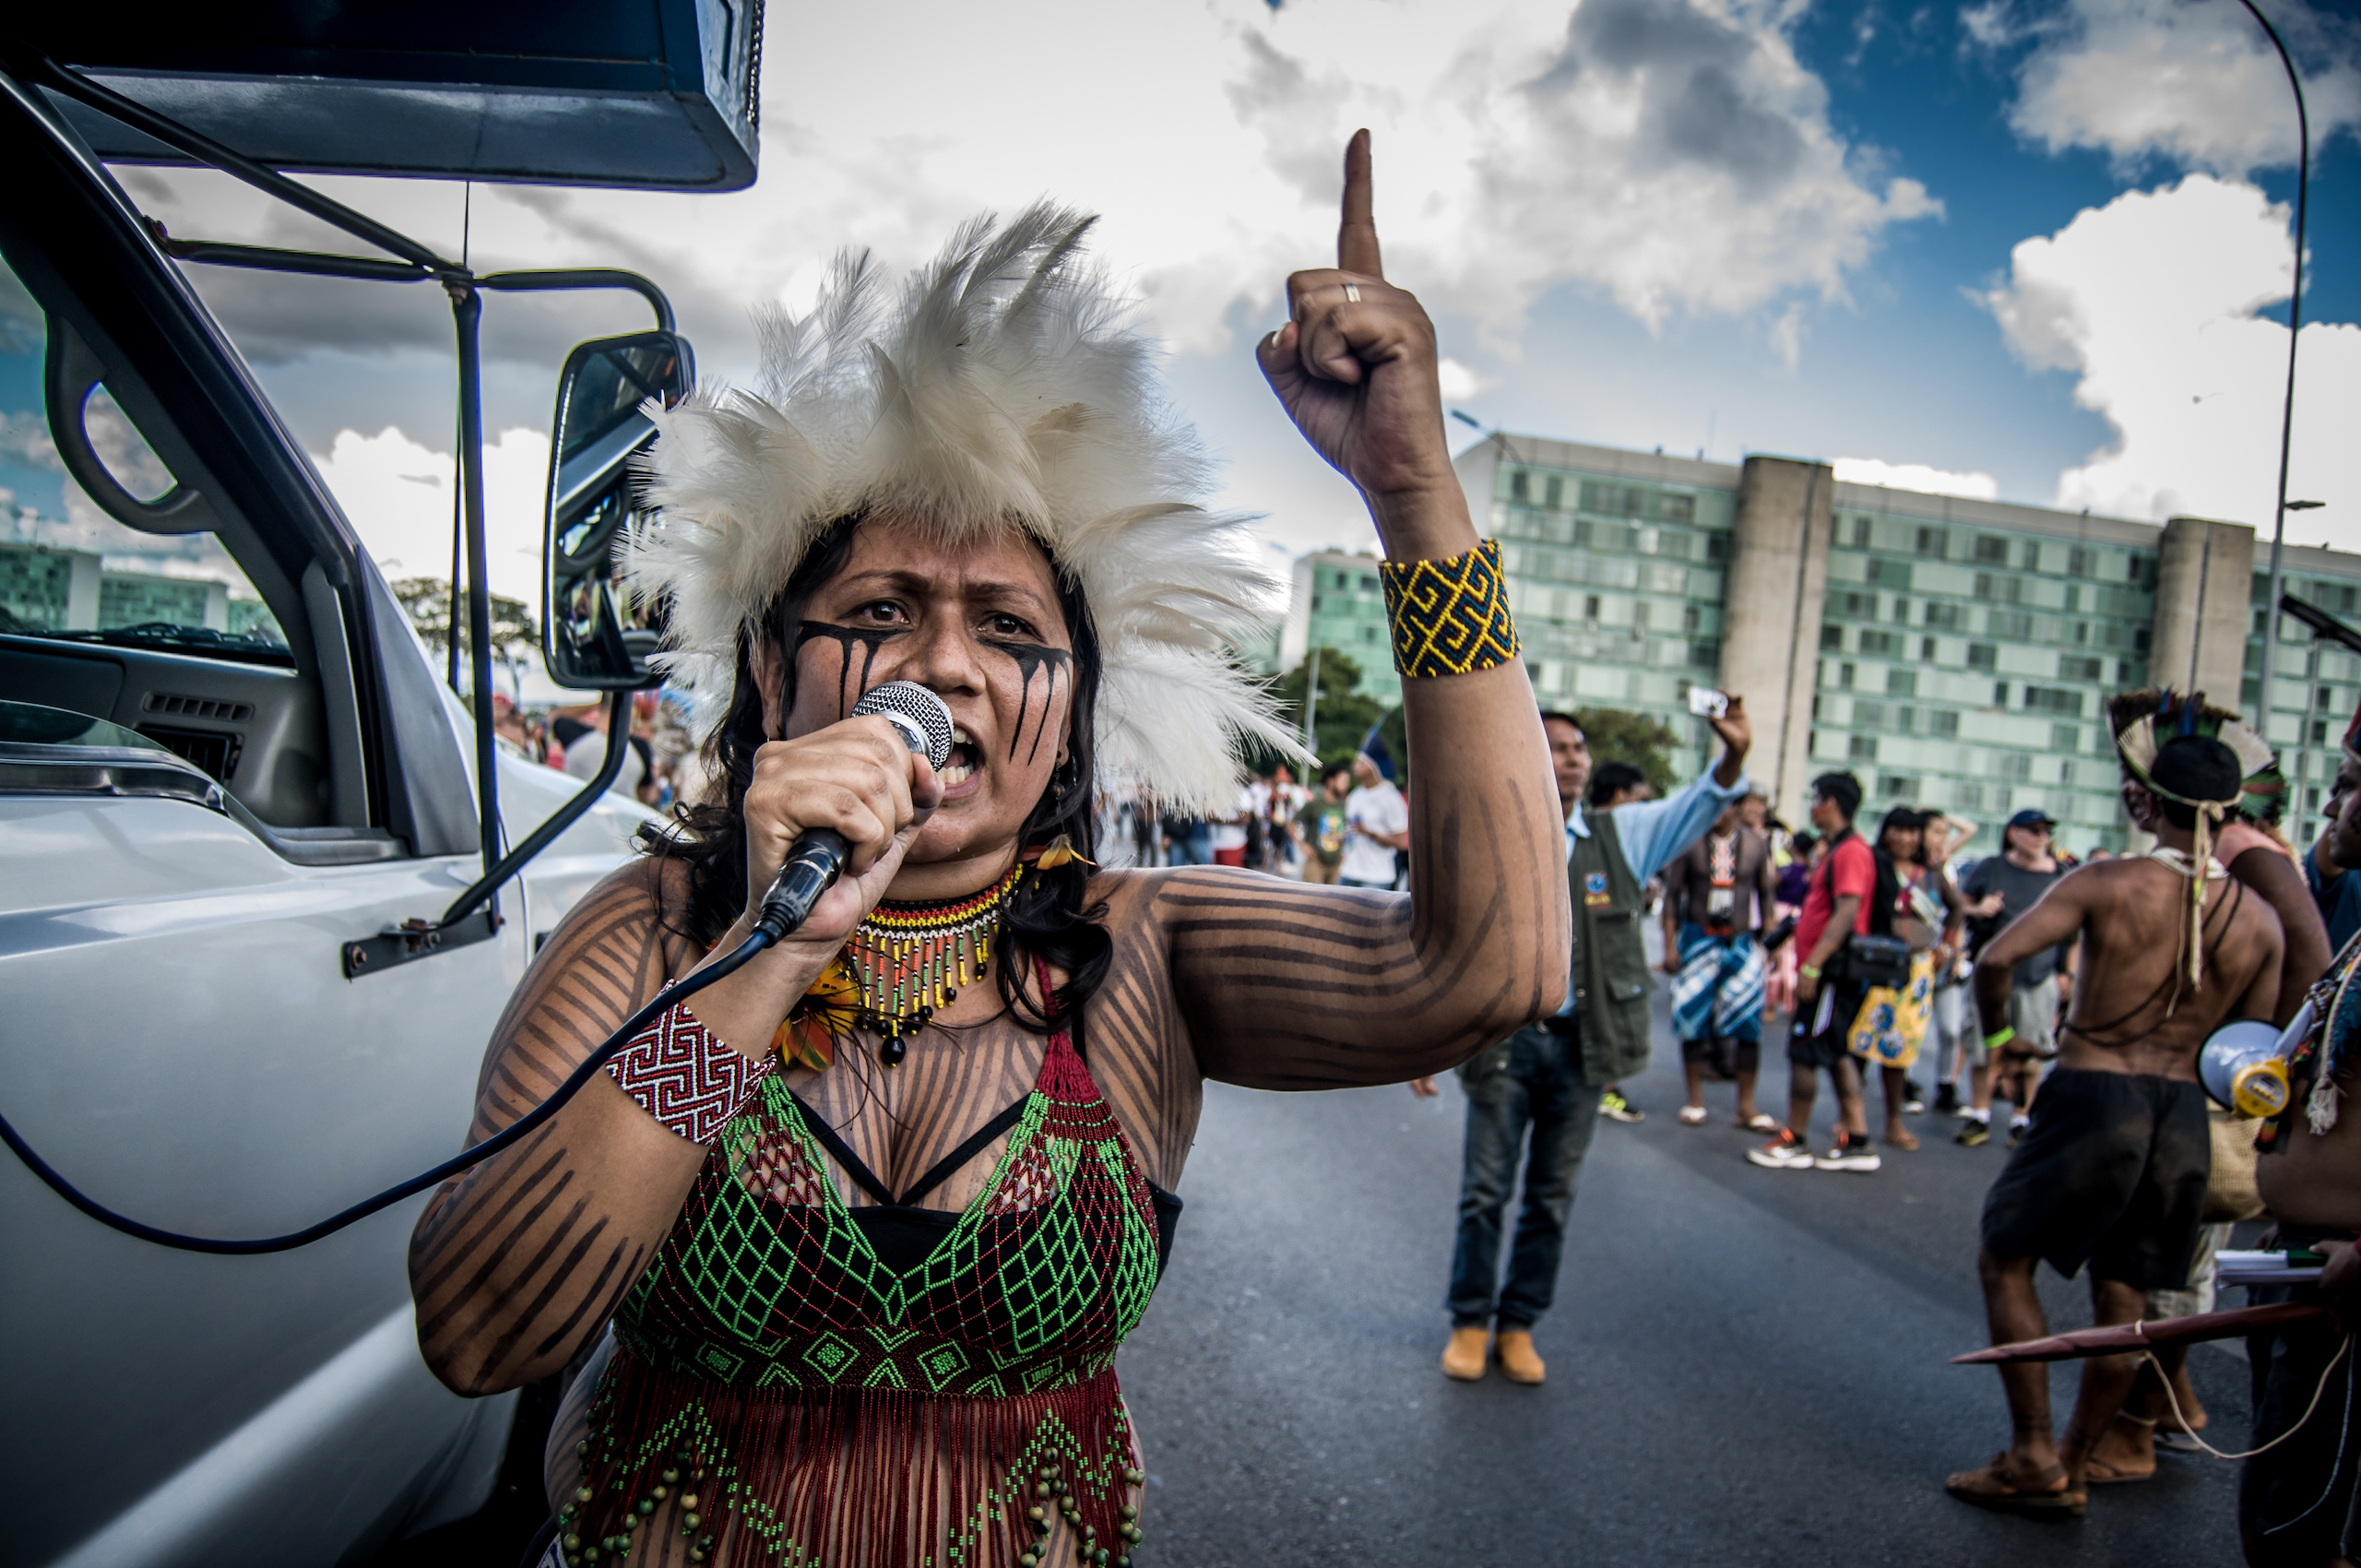 In 2019, indigenous leader Nara Baré embarked on a tour to Europe to denounce violations against indigenous peoples and the environment in Brazil (Image: <a href="https://media.greenpeace.org/archive/Indigenous-leader-Nara-Bare-27MZIFJ8YW65M.html">Midia Ninja</a>, <a href="https://creativecommons.org/licenses/by-sa/4.0/">CC BY-SA 4.0</a>)”>In 2019, indigenous leader Nara Baré embarked on a tour to Europe to denounce violations against indigenous peoples and the environment in Brazil (Image: <a href=